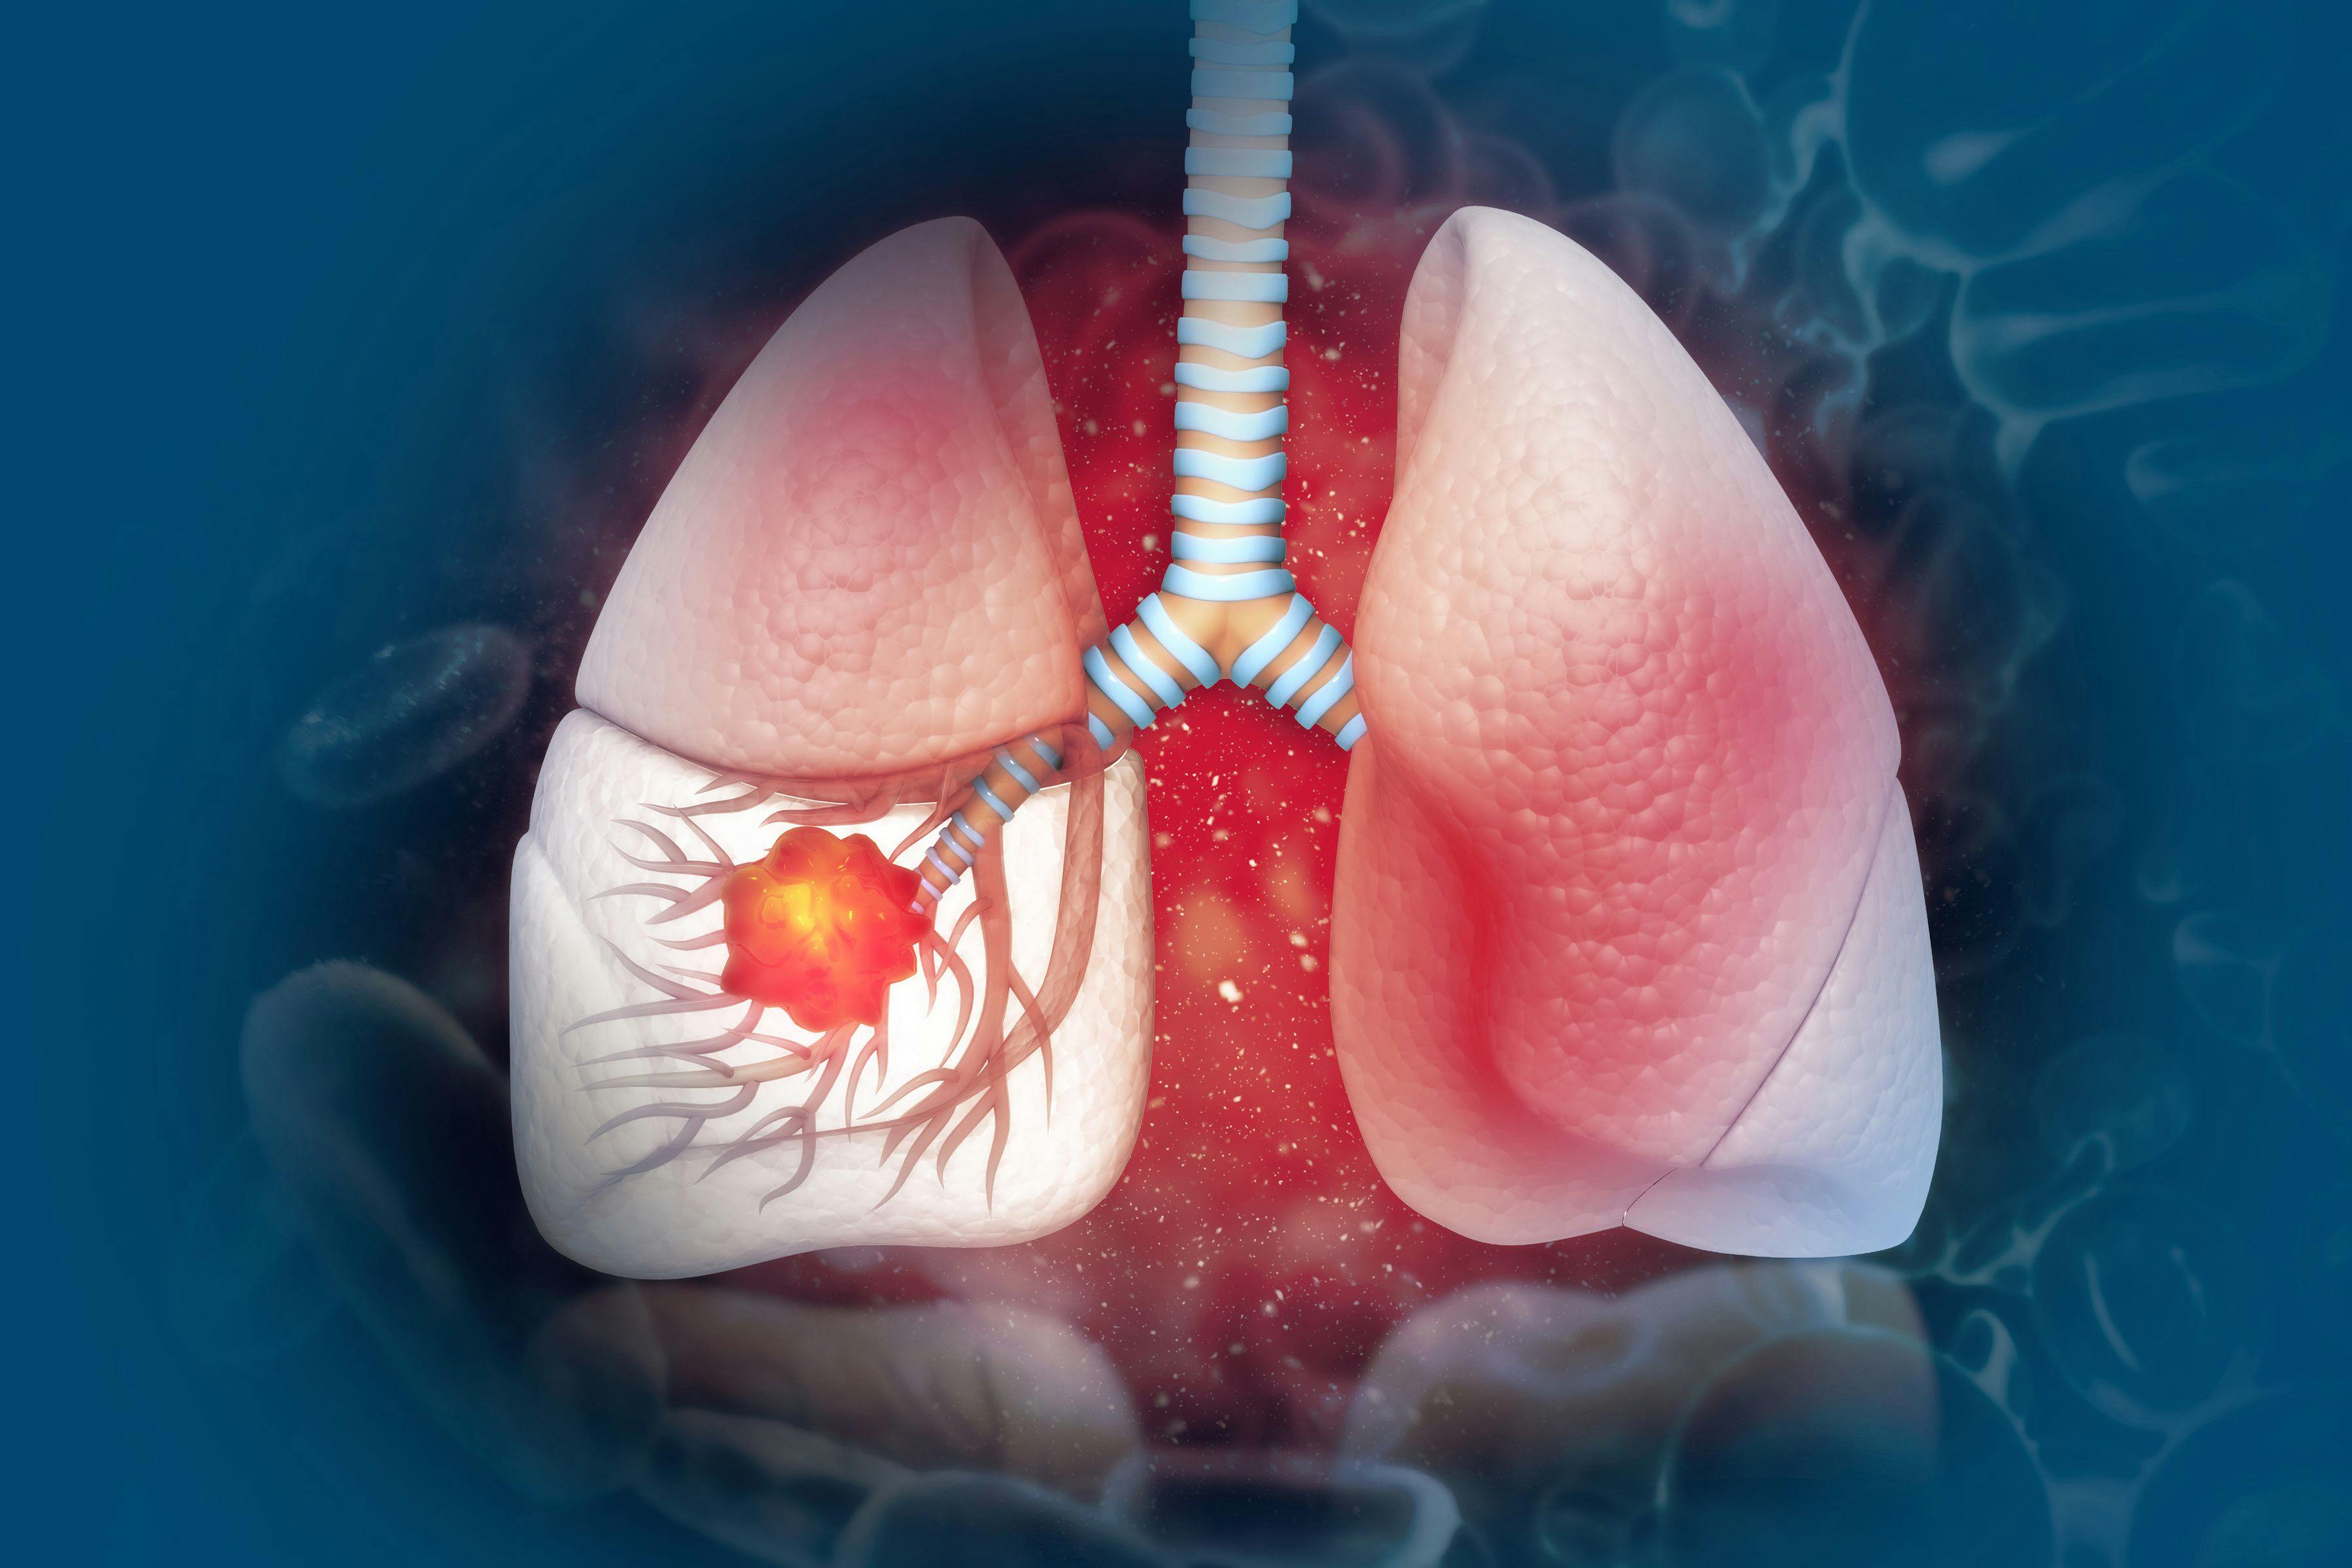 Lung cancer. lung disease | Image Credit: © Crystal light - www.stock.adobe.com